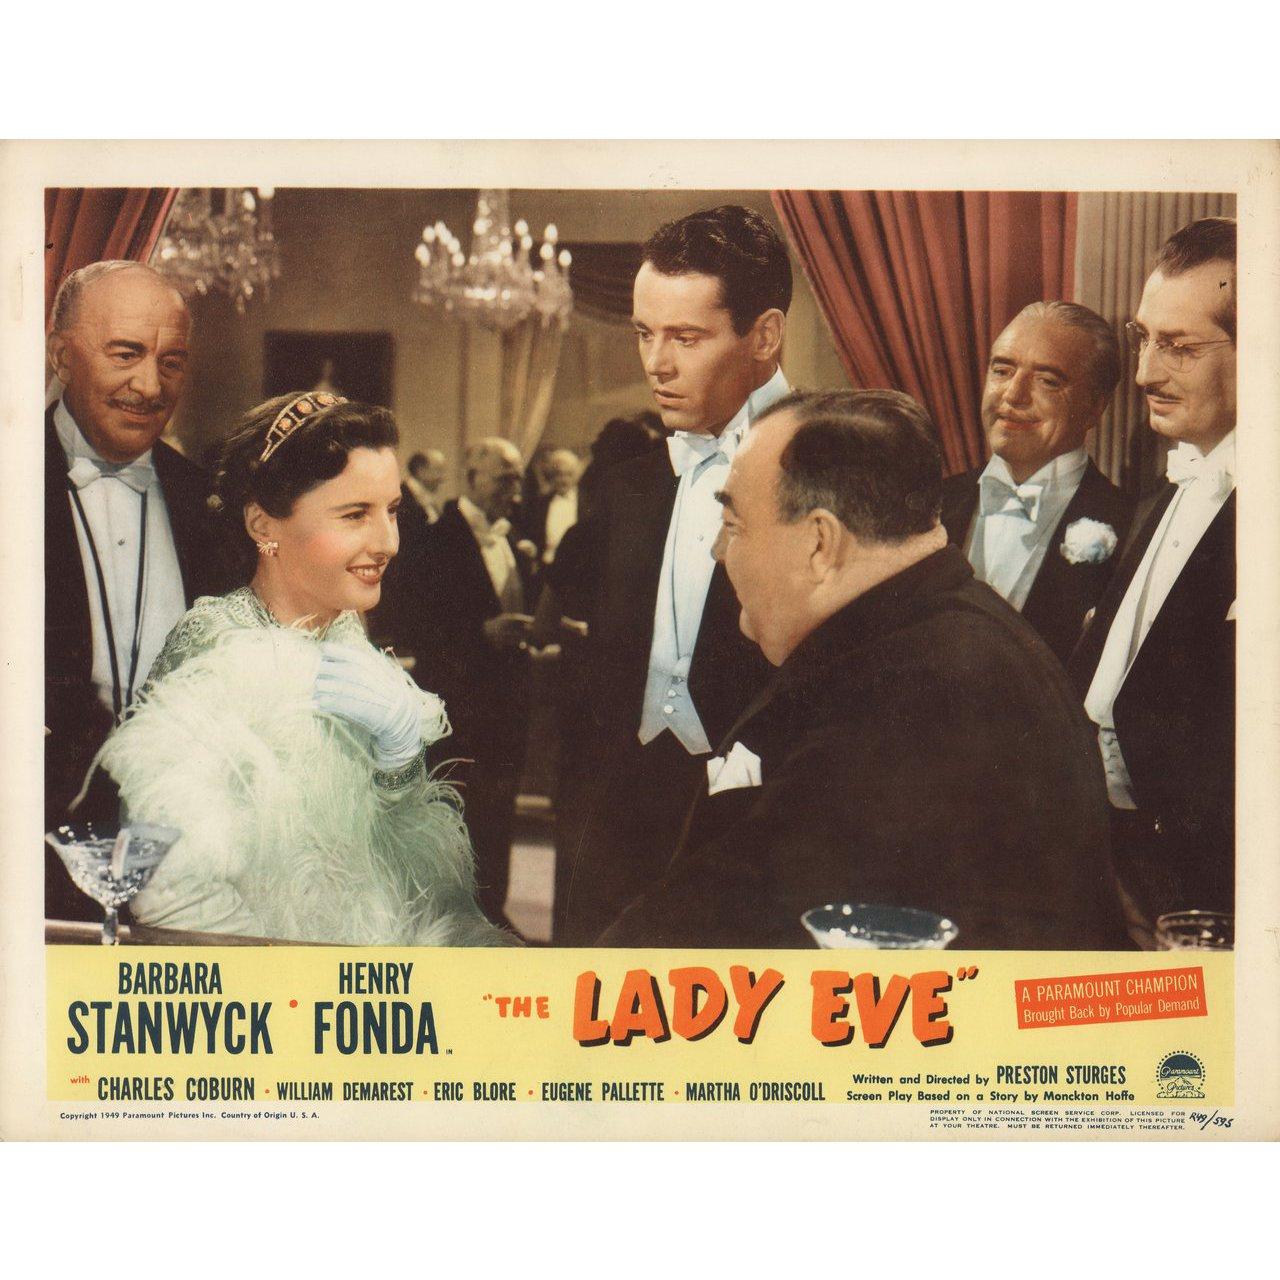 Original 1949 re-release U.S. scene card for the 1941 film The Lady Eve directed by Preston Sturges with Barbara Stanwyck / Henry Fonda / Charles Coburn / Eugene Pallette. Very Good-Fine condition. Please note: the size is stated in inches and the